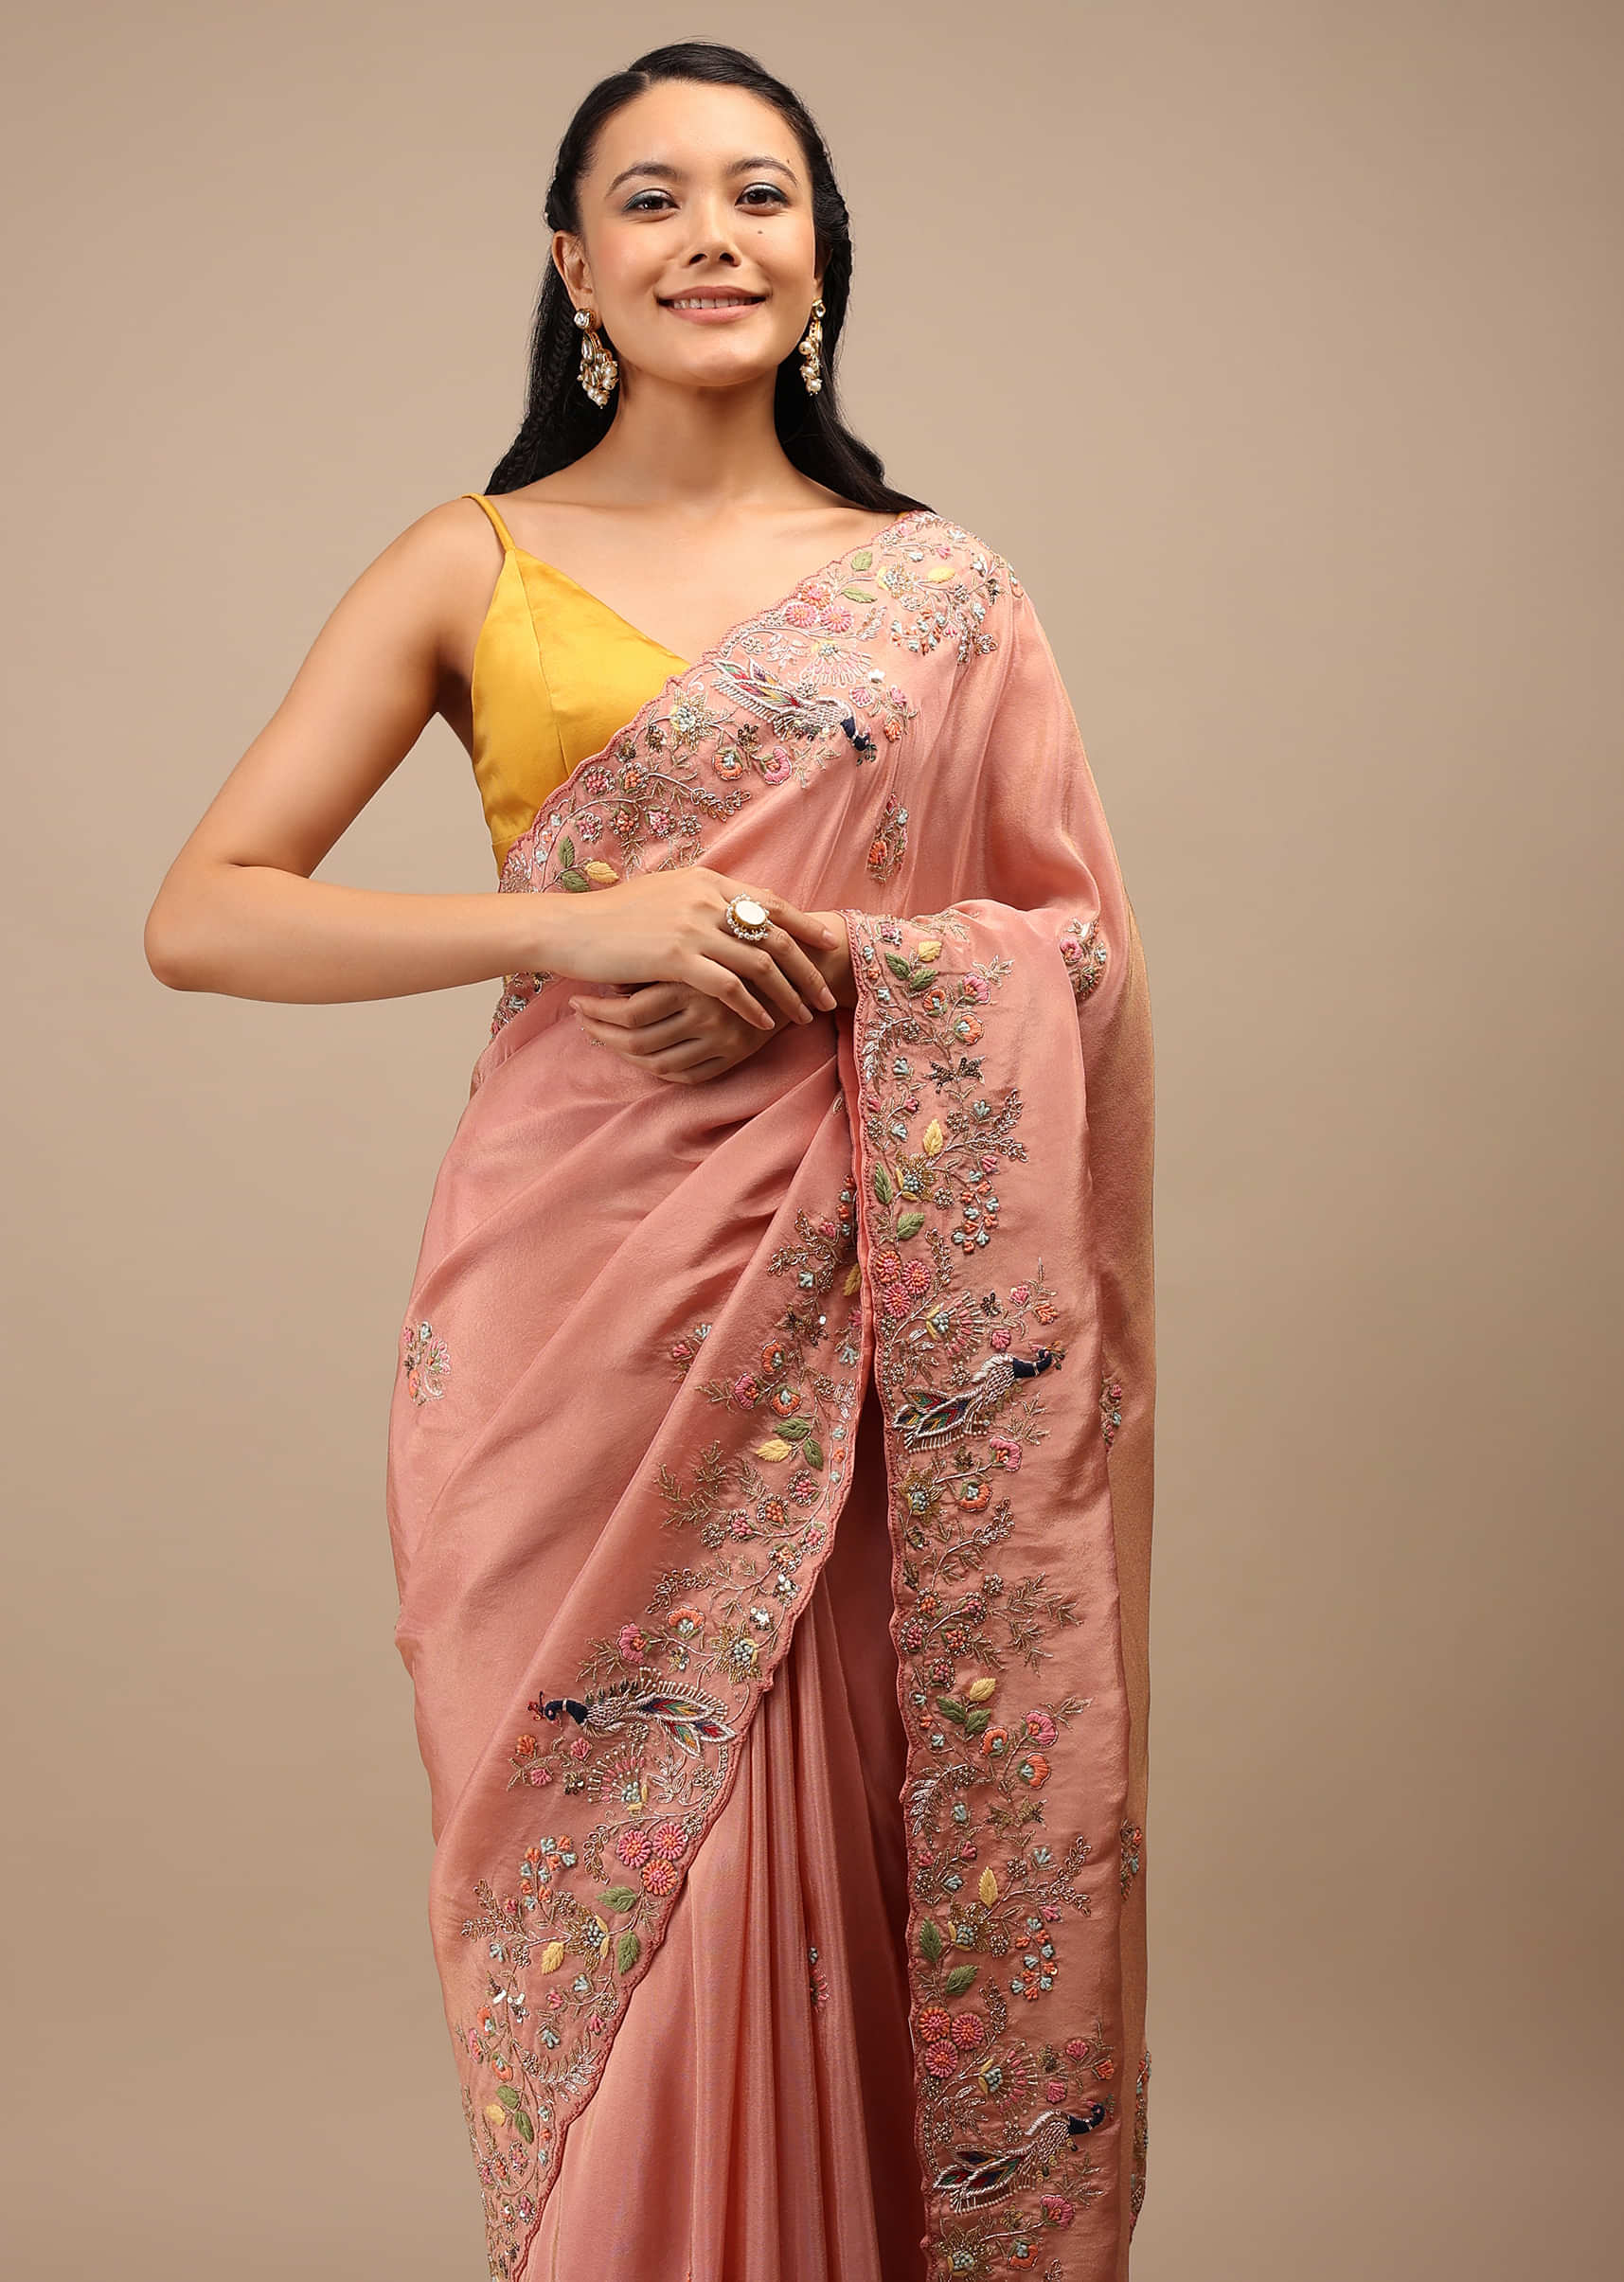 Peach Organza Saree In Multi-Color Resham And Peacock Motifs Work On The Border